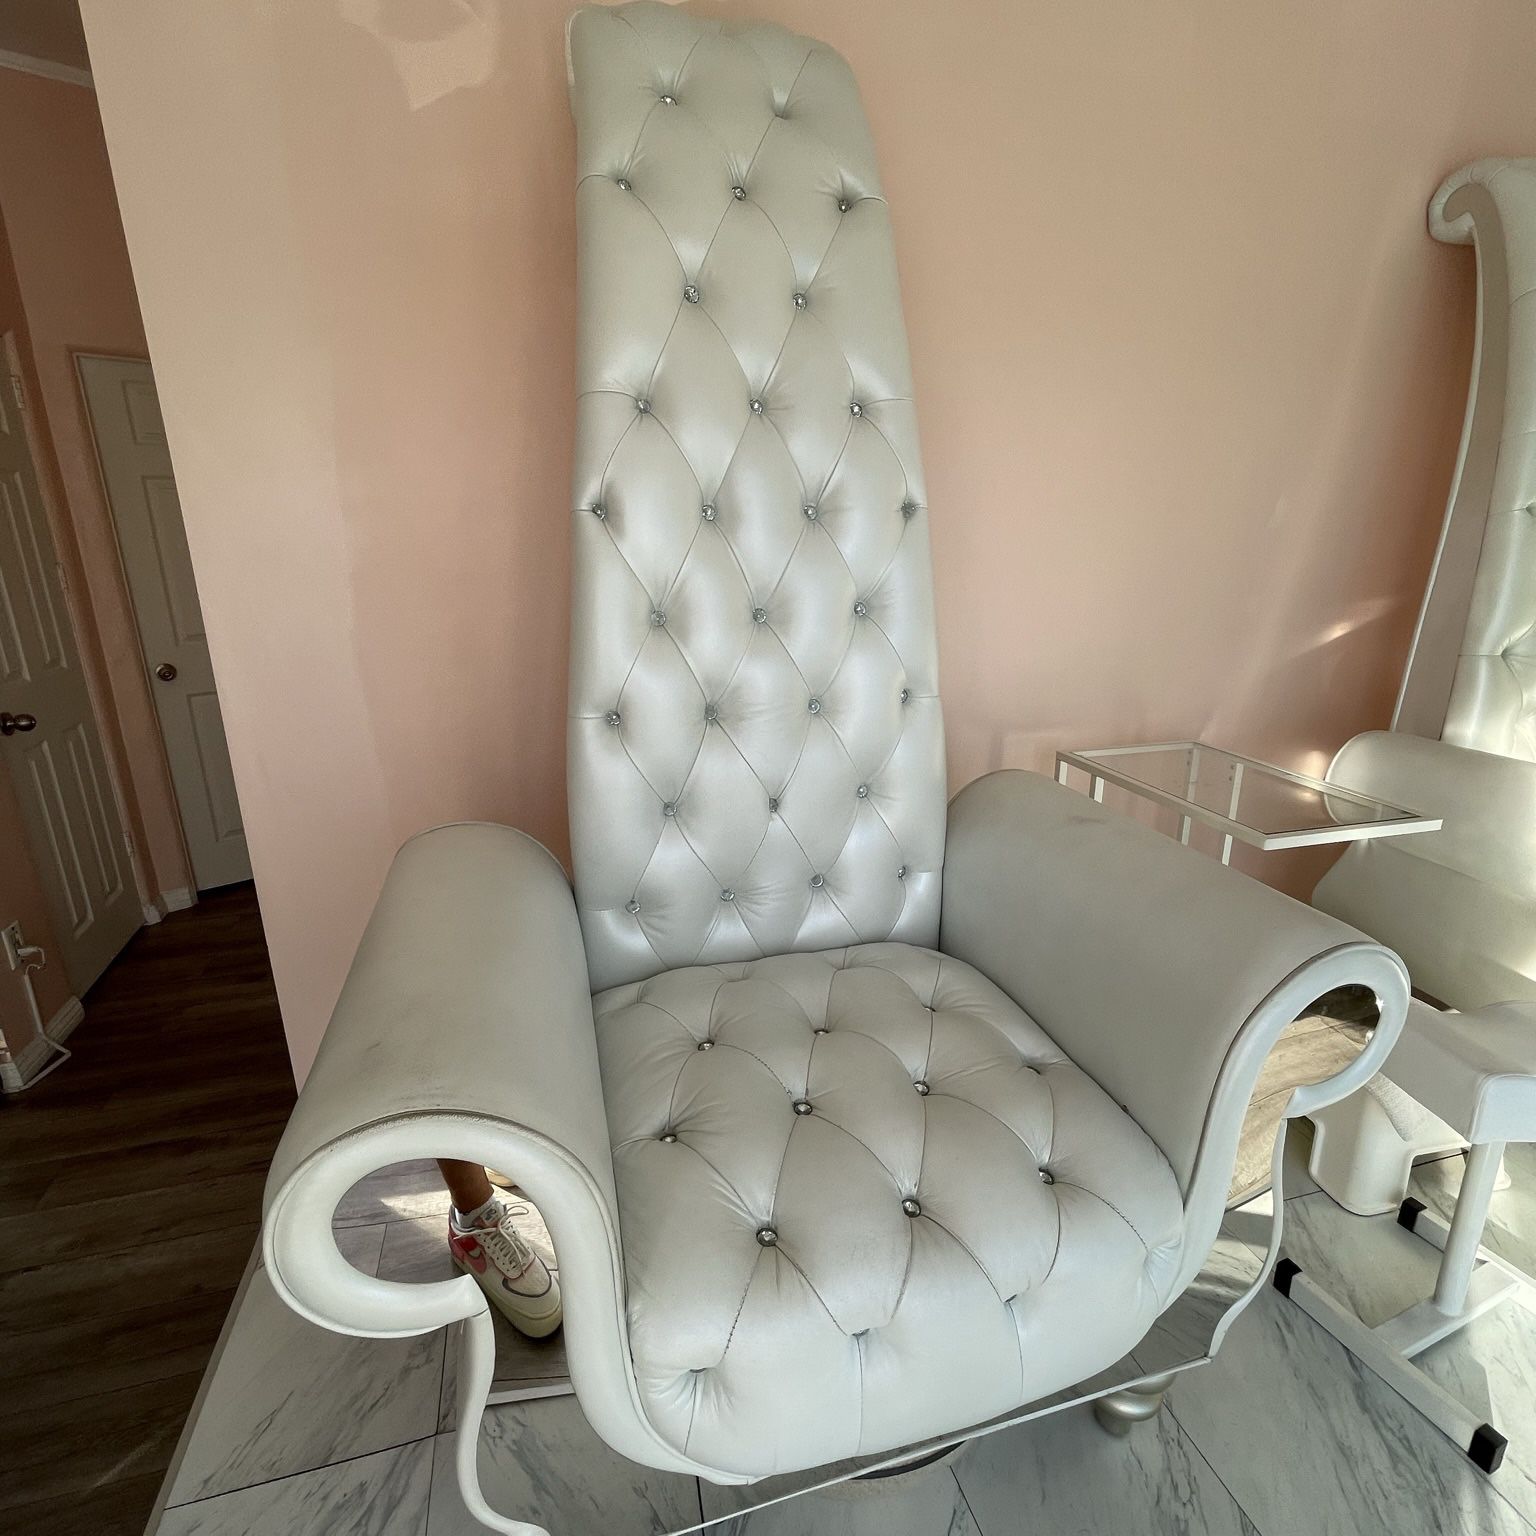 Pedicure Princess 2 Chairs Royal Quality $1000 For 2